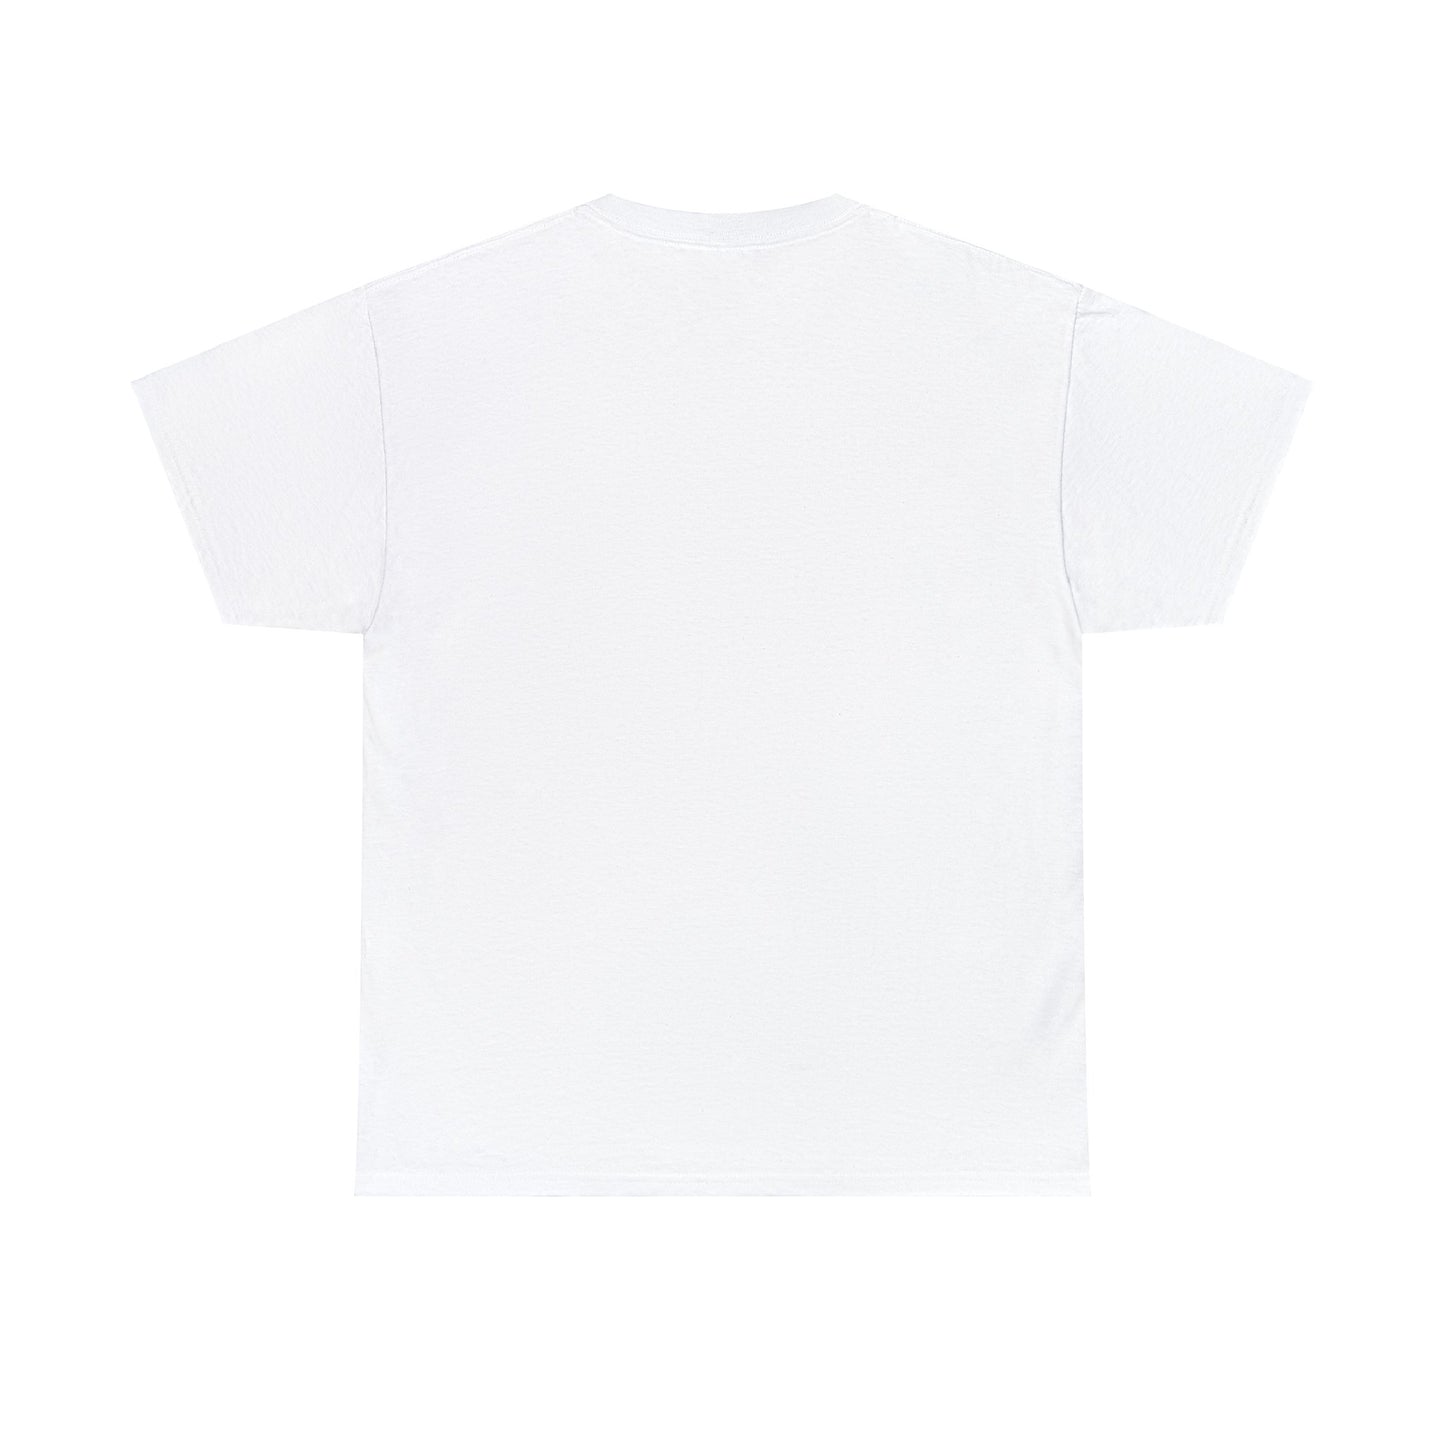 Want to Hook Up - Unisex Heavy Cotton Tee